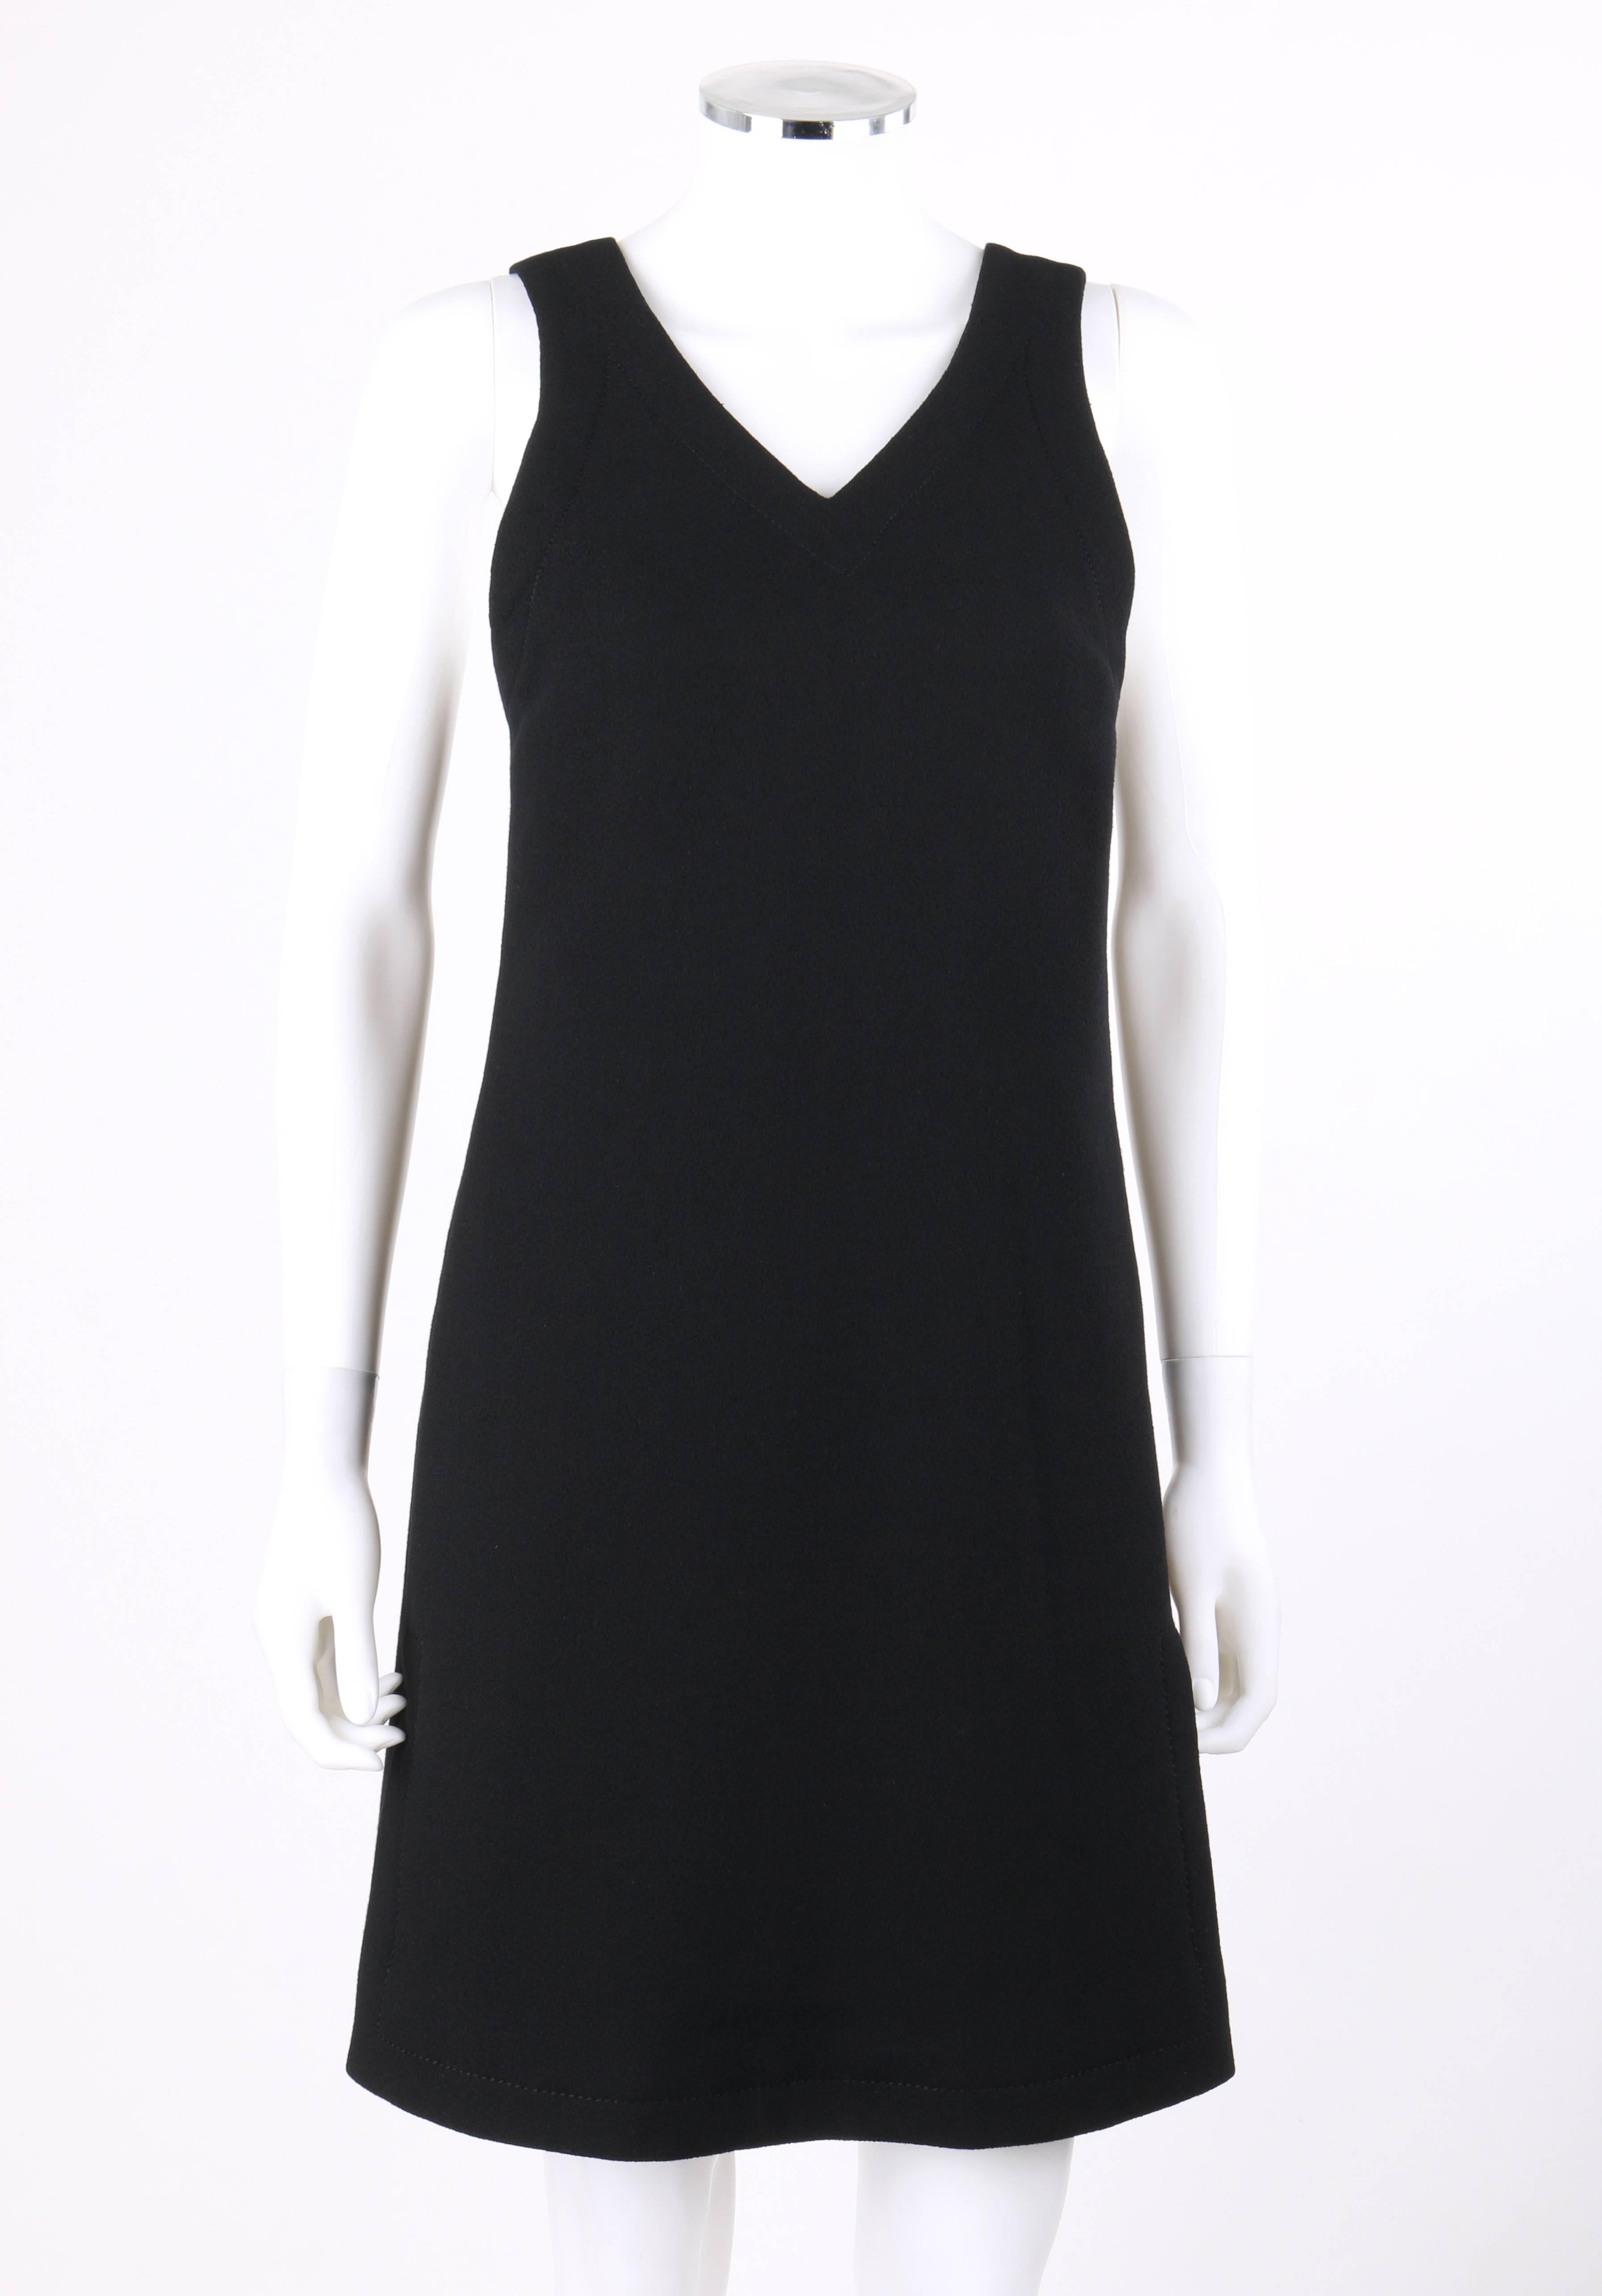 Vintage Jean Patou c.1960's Haute Couture numbered (89737) black wool v-neck jumper dress. Designed by Michel Goma. V-neckline. Sleeveless. Thin shoulder straps with single black button closure at back. Shift jumper style. Two side seam knife pleats